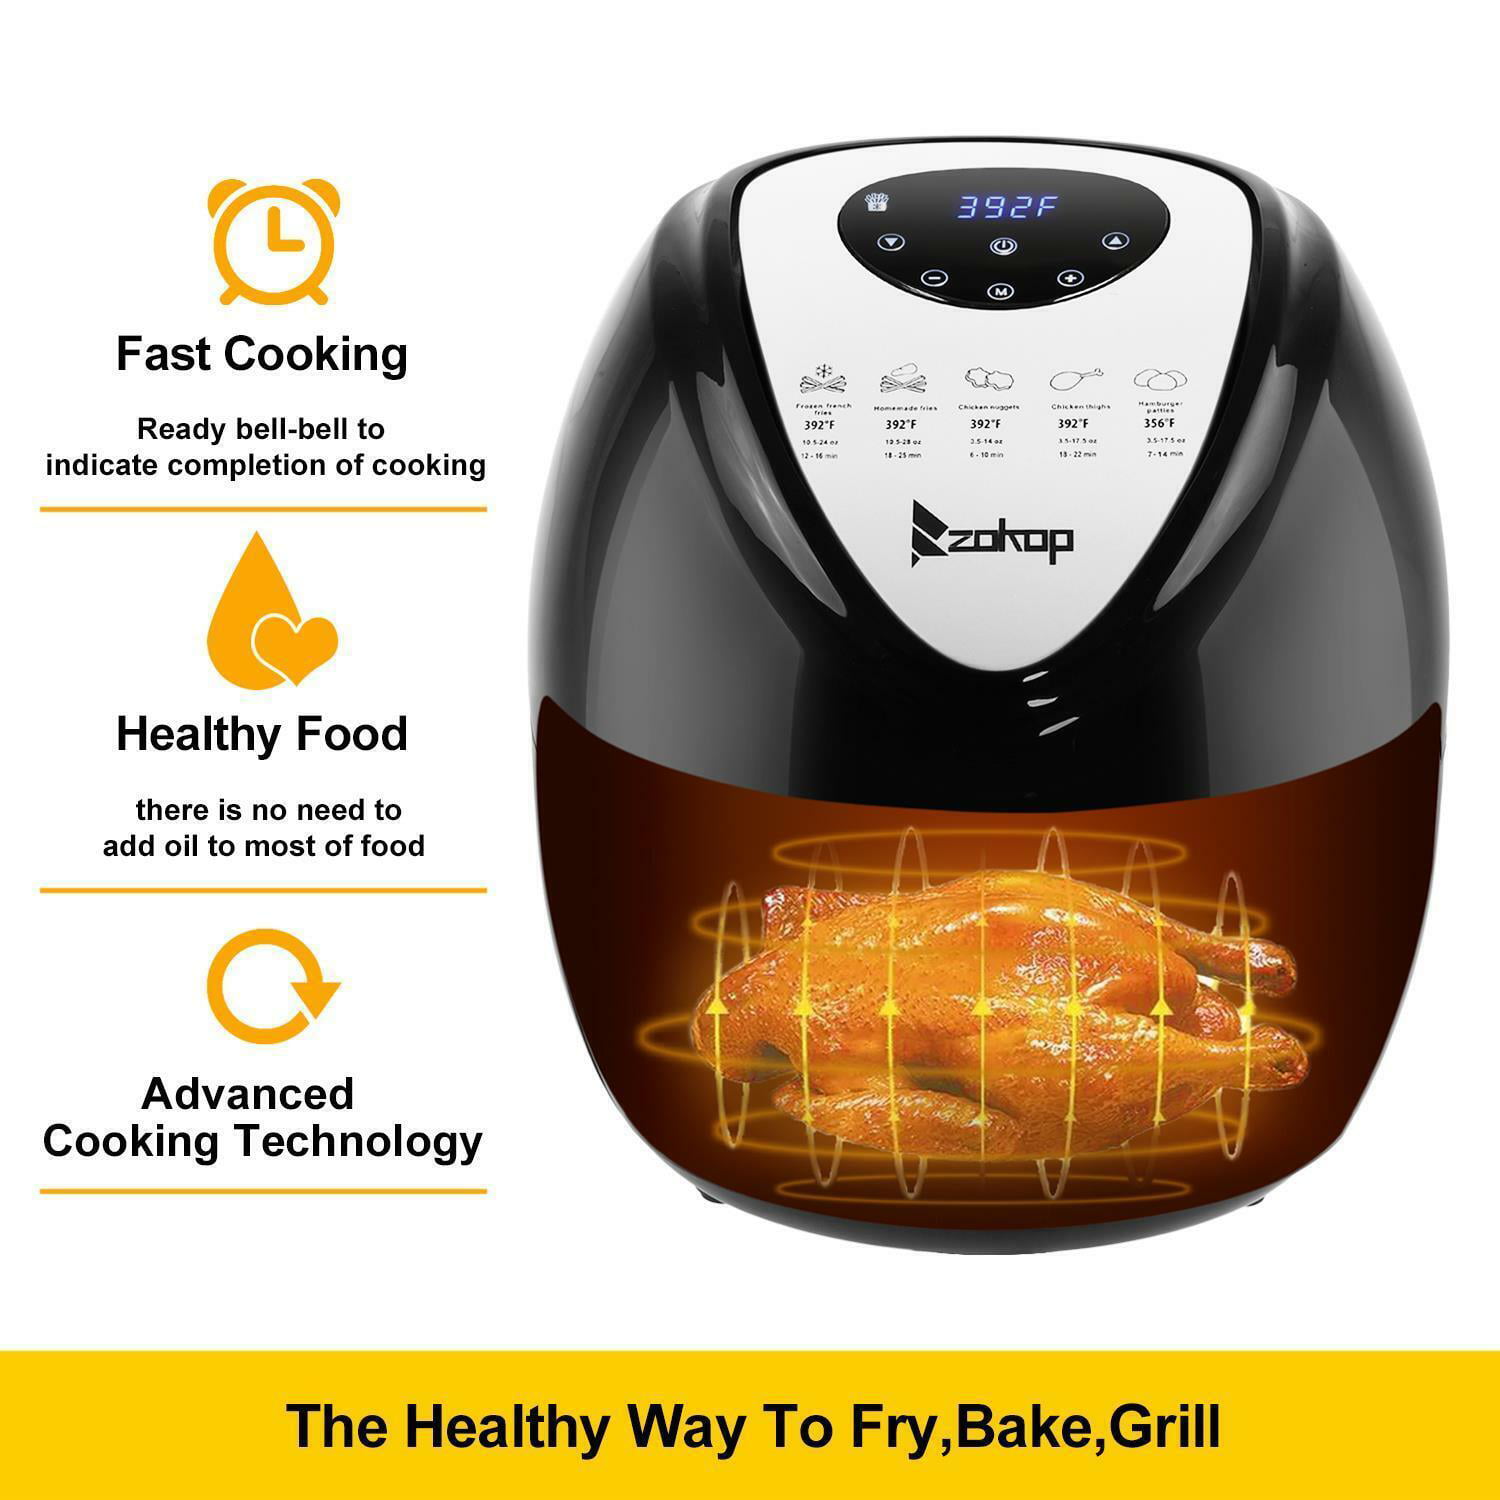 ROWAN Electric Appliance LLC: Clearance, Air Fryer for only $59.99, while  stocks last